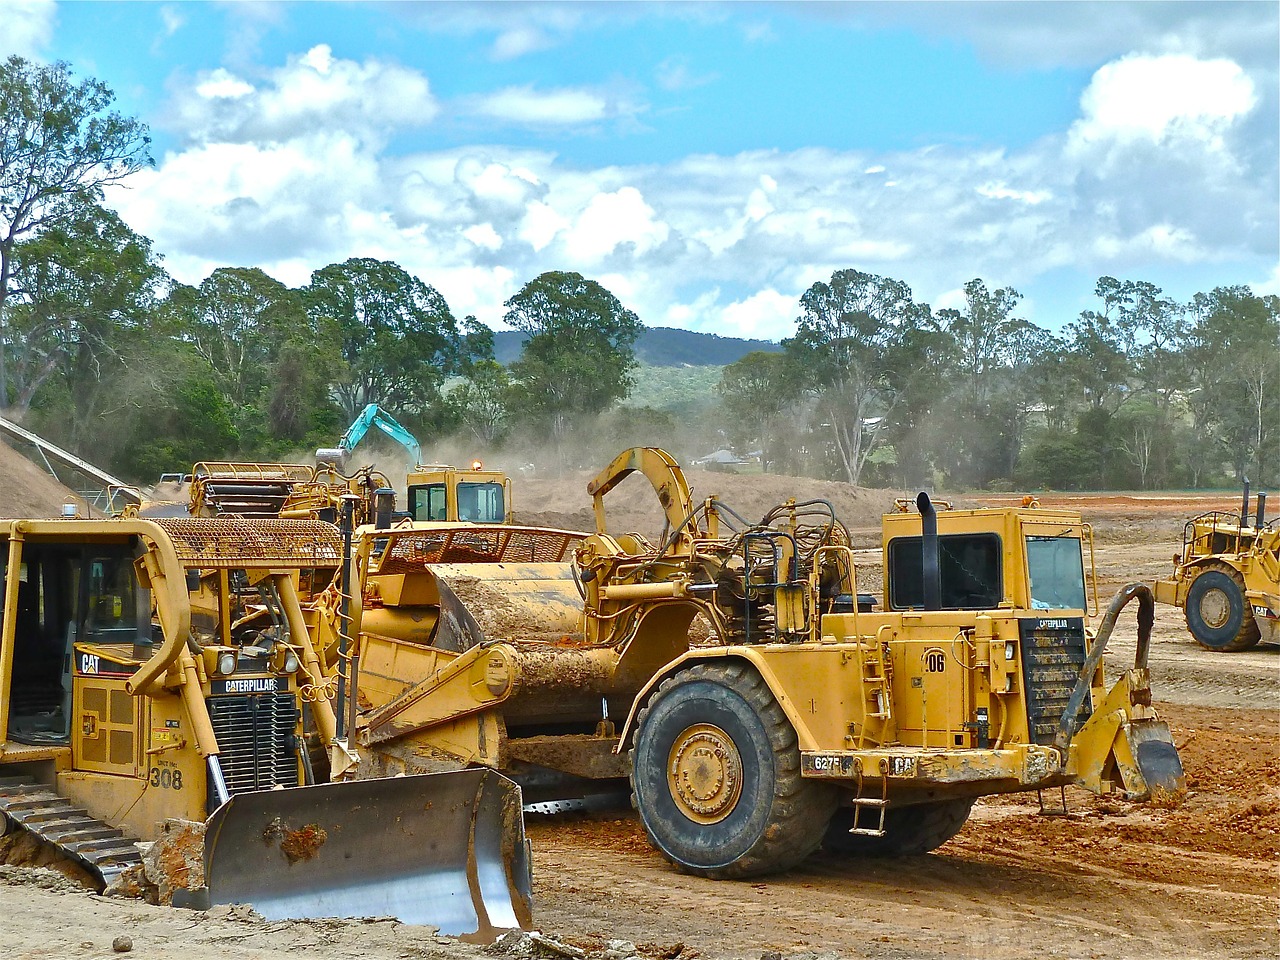 A Caterpillar bulldozer in forefront.

Image is in the public domain.